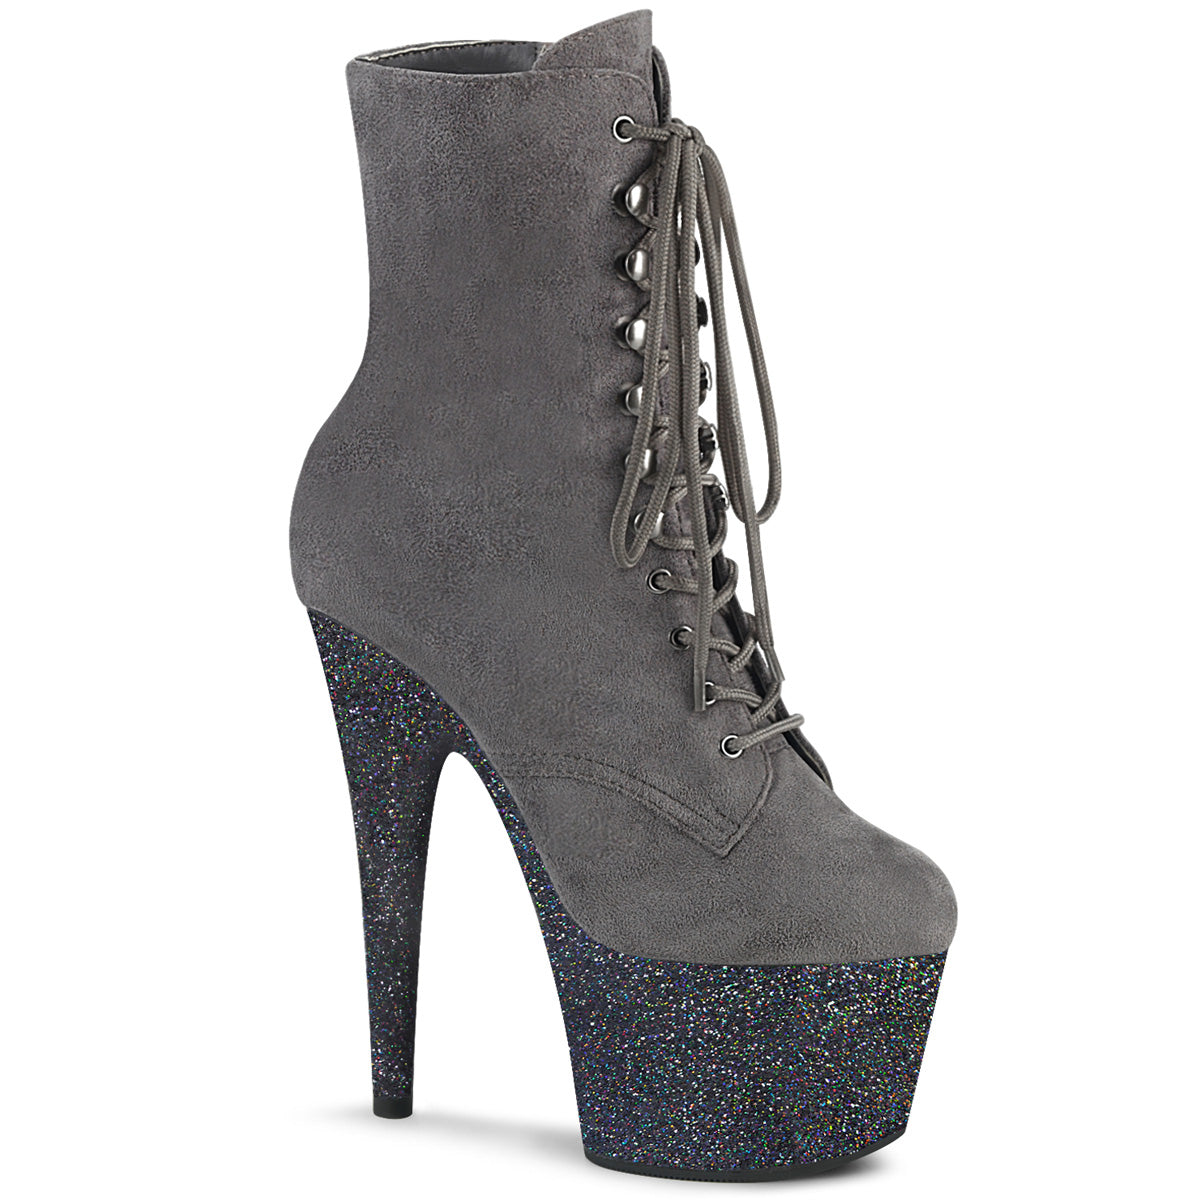 Pleaser Womens Ankle Boots ADORE-1020FSMG Grey Faux Suede/Grey Multi Mini Glitter